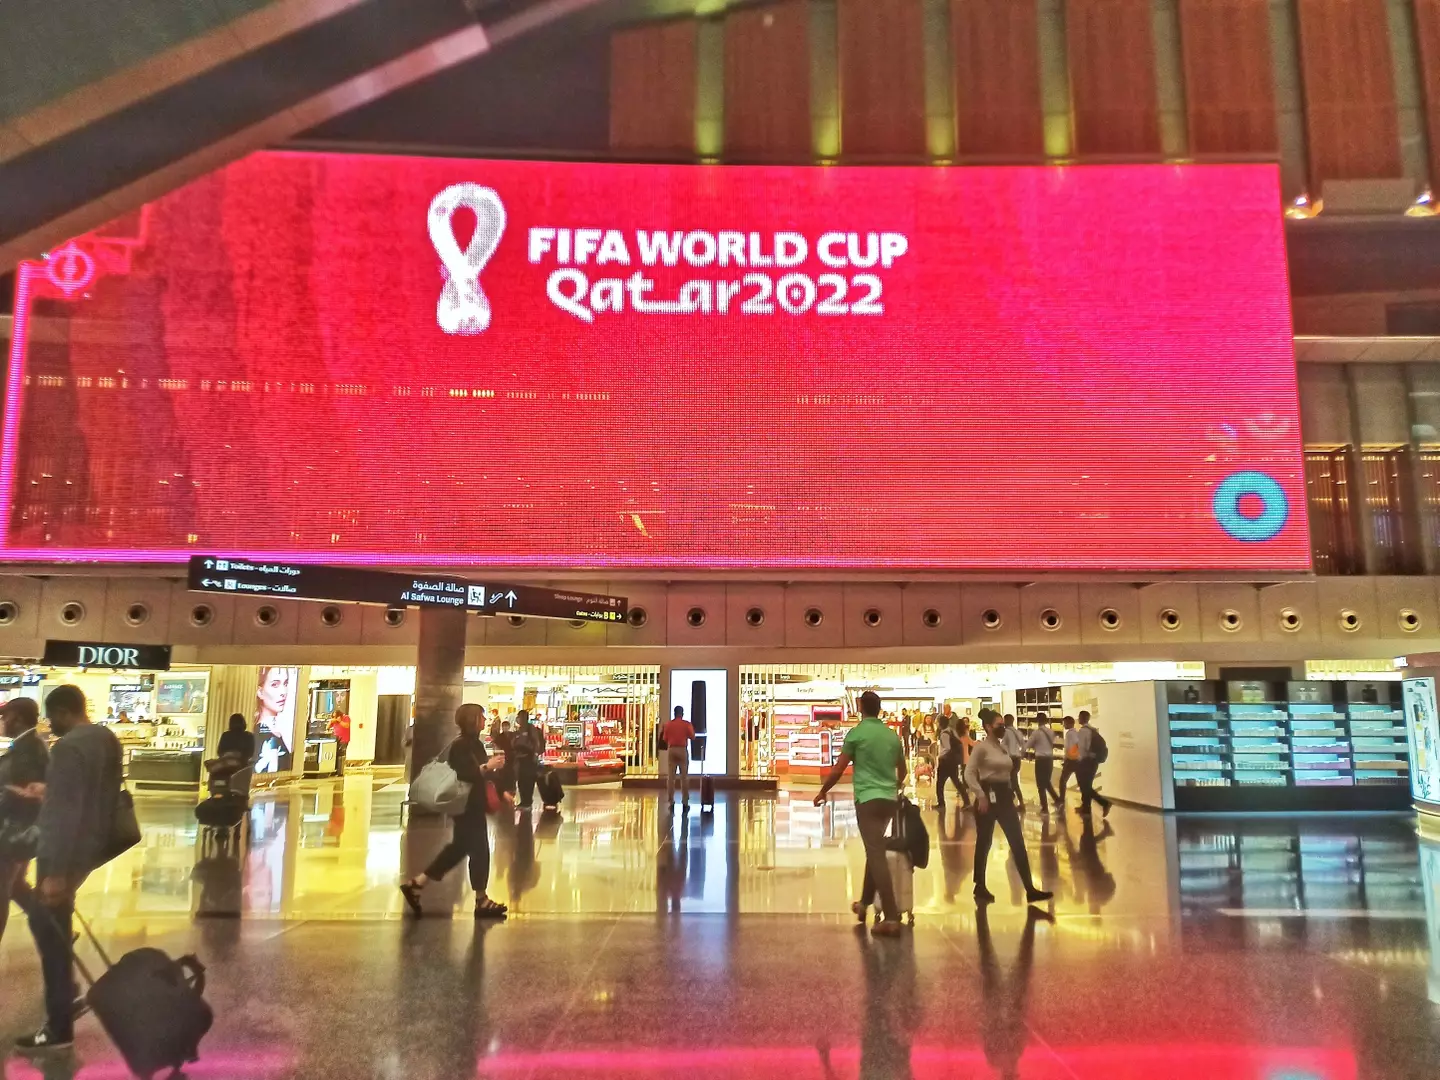 Those visiting for the World Cup are expected to adhere to local laws and customs.